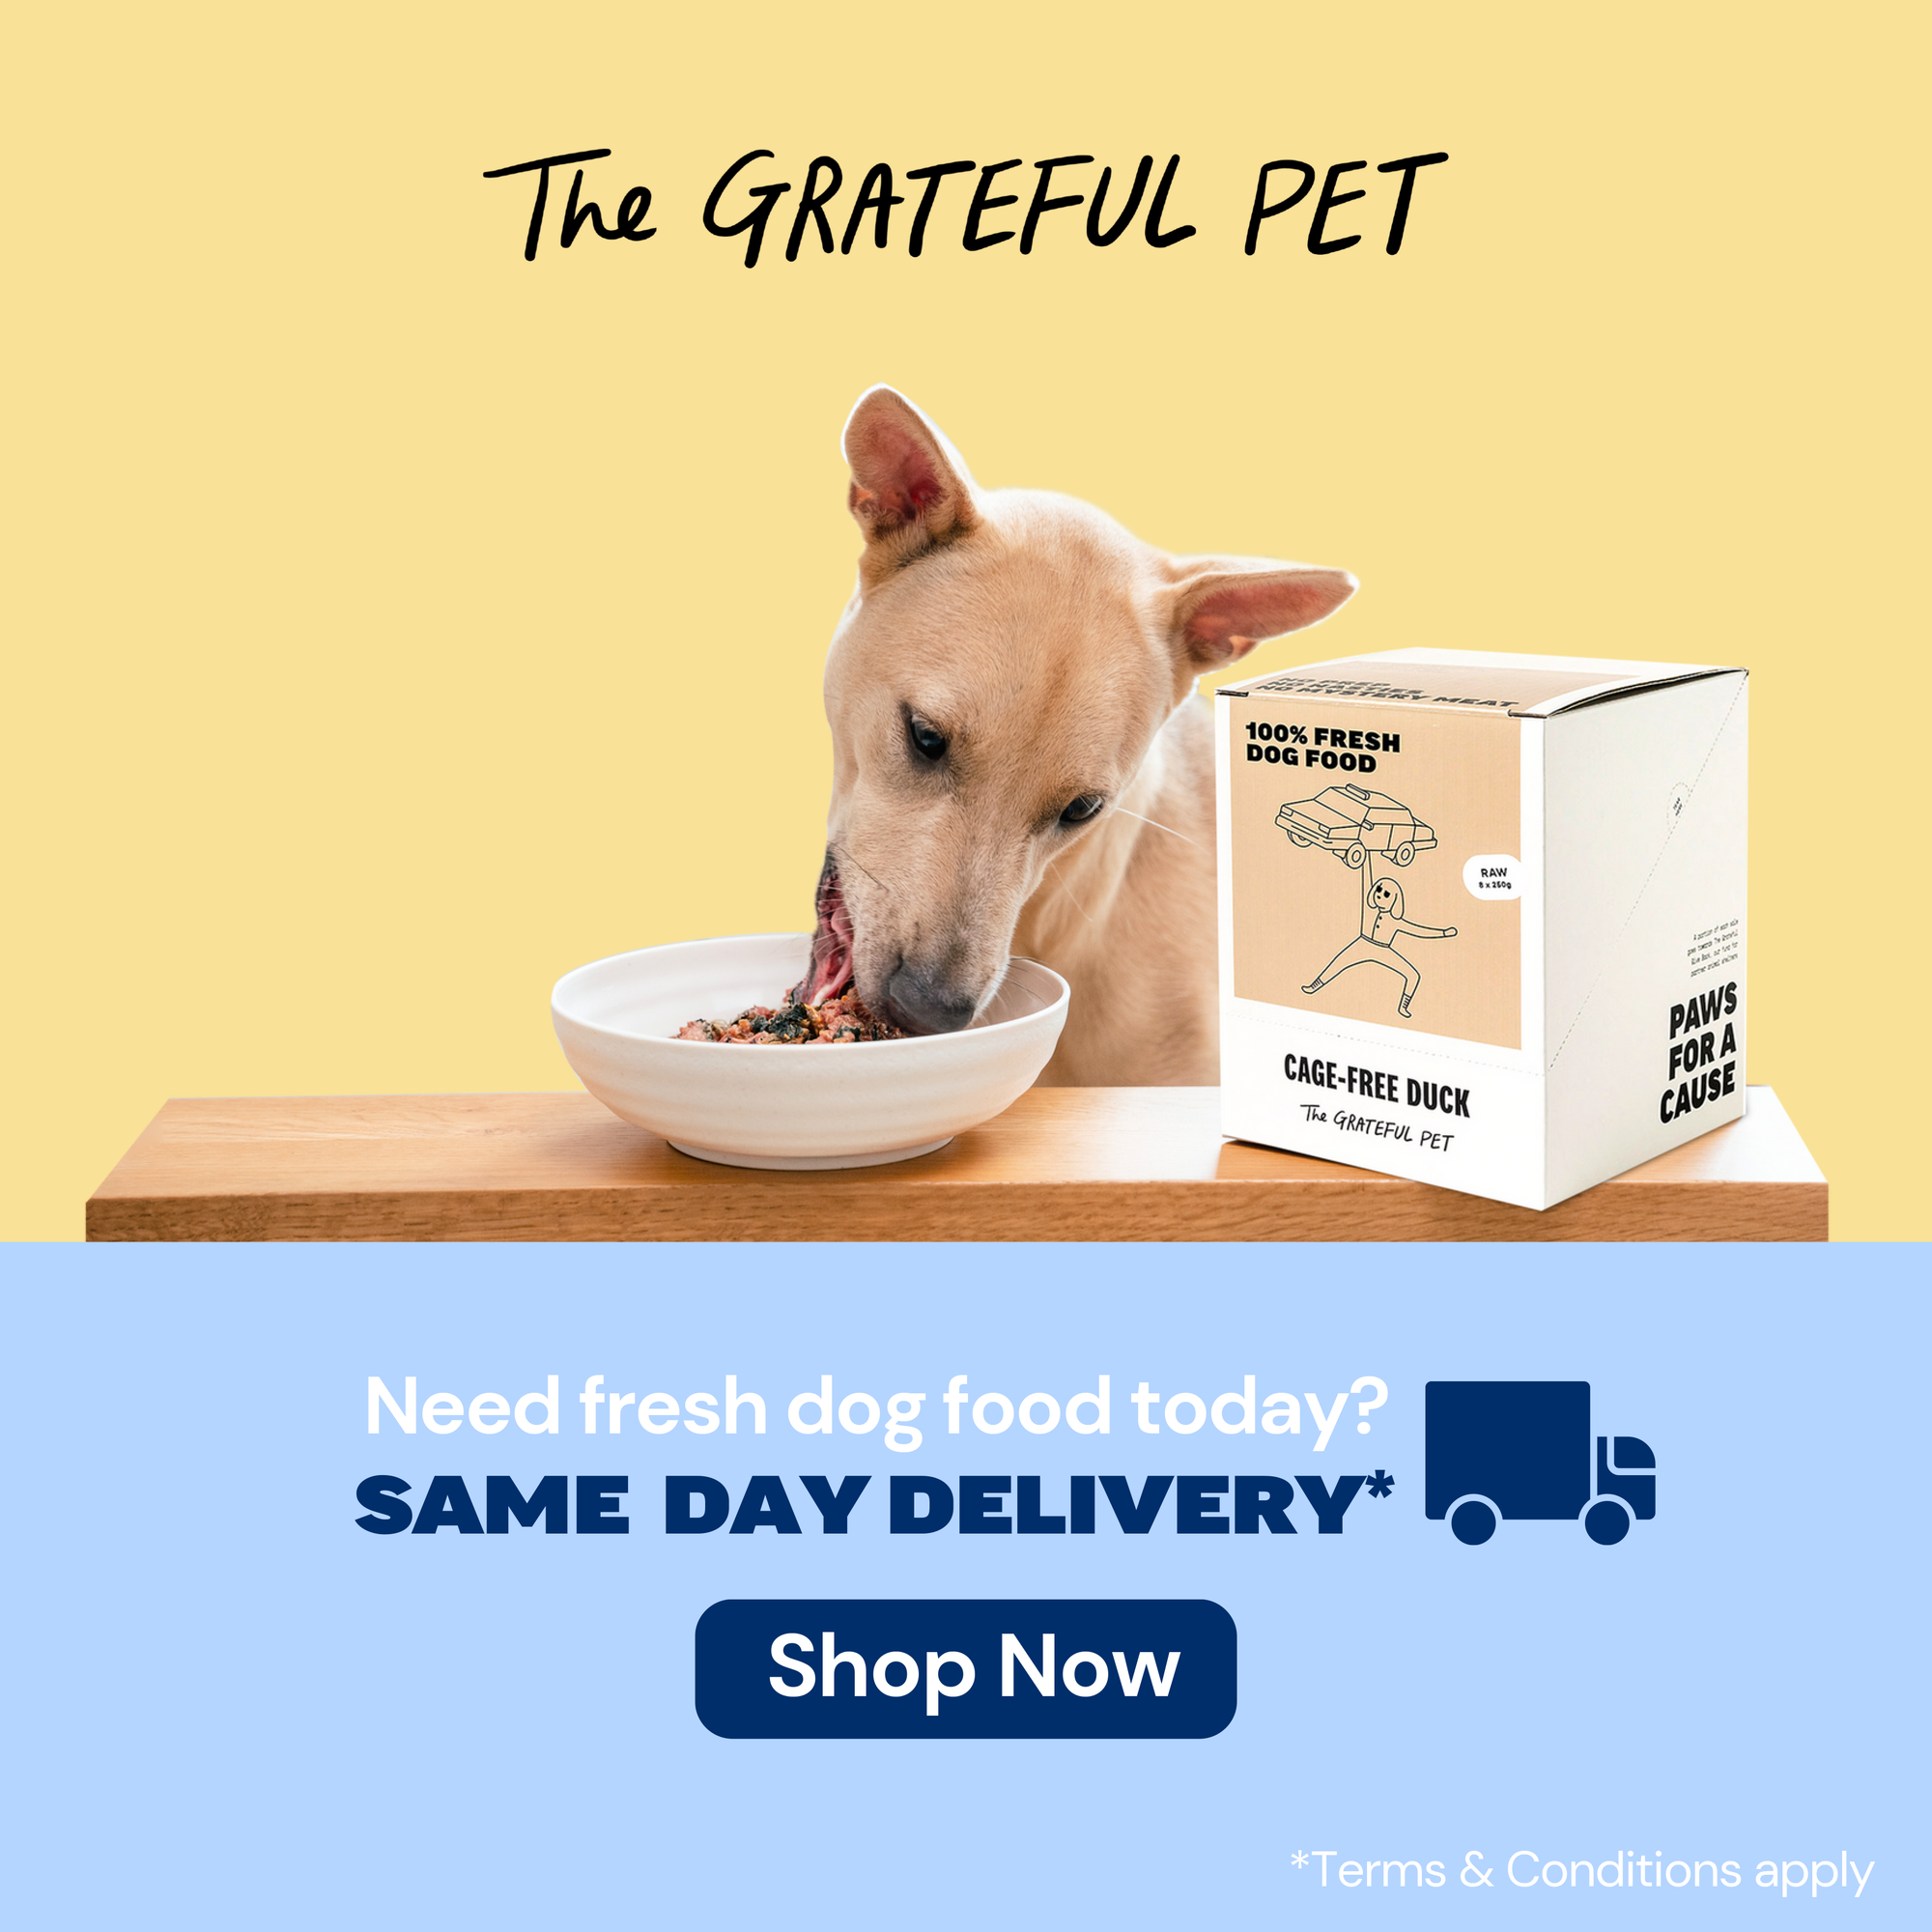 Buy The Grateful Pet Dog Food With Same-Day Deliver | Singapore's Best Online Pet Store: Good Dog People